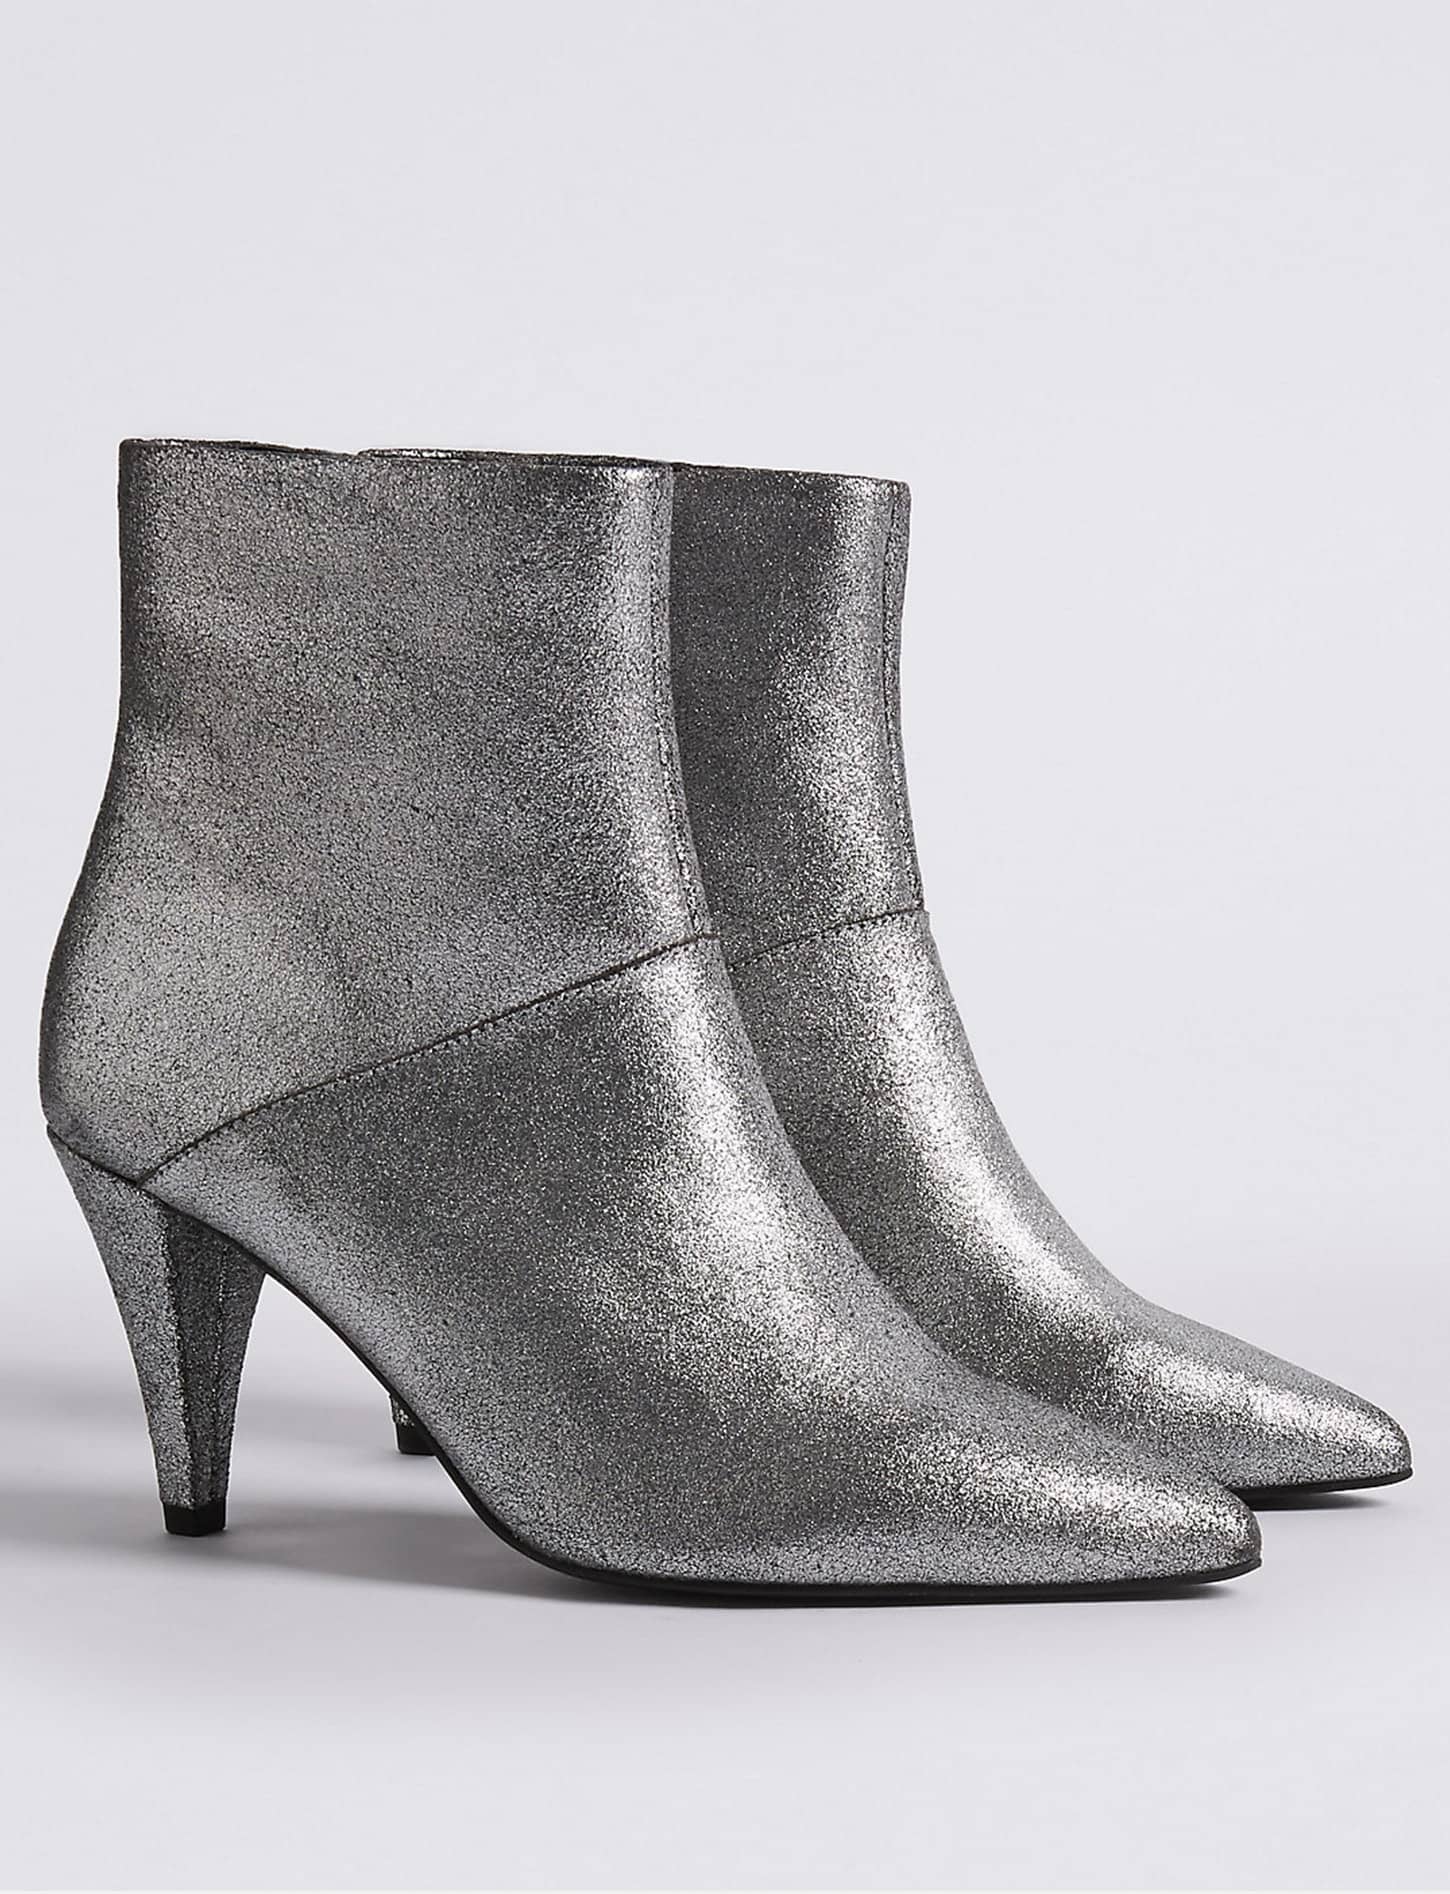 M&S leather silver boots